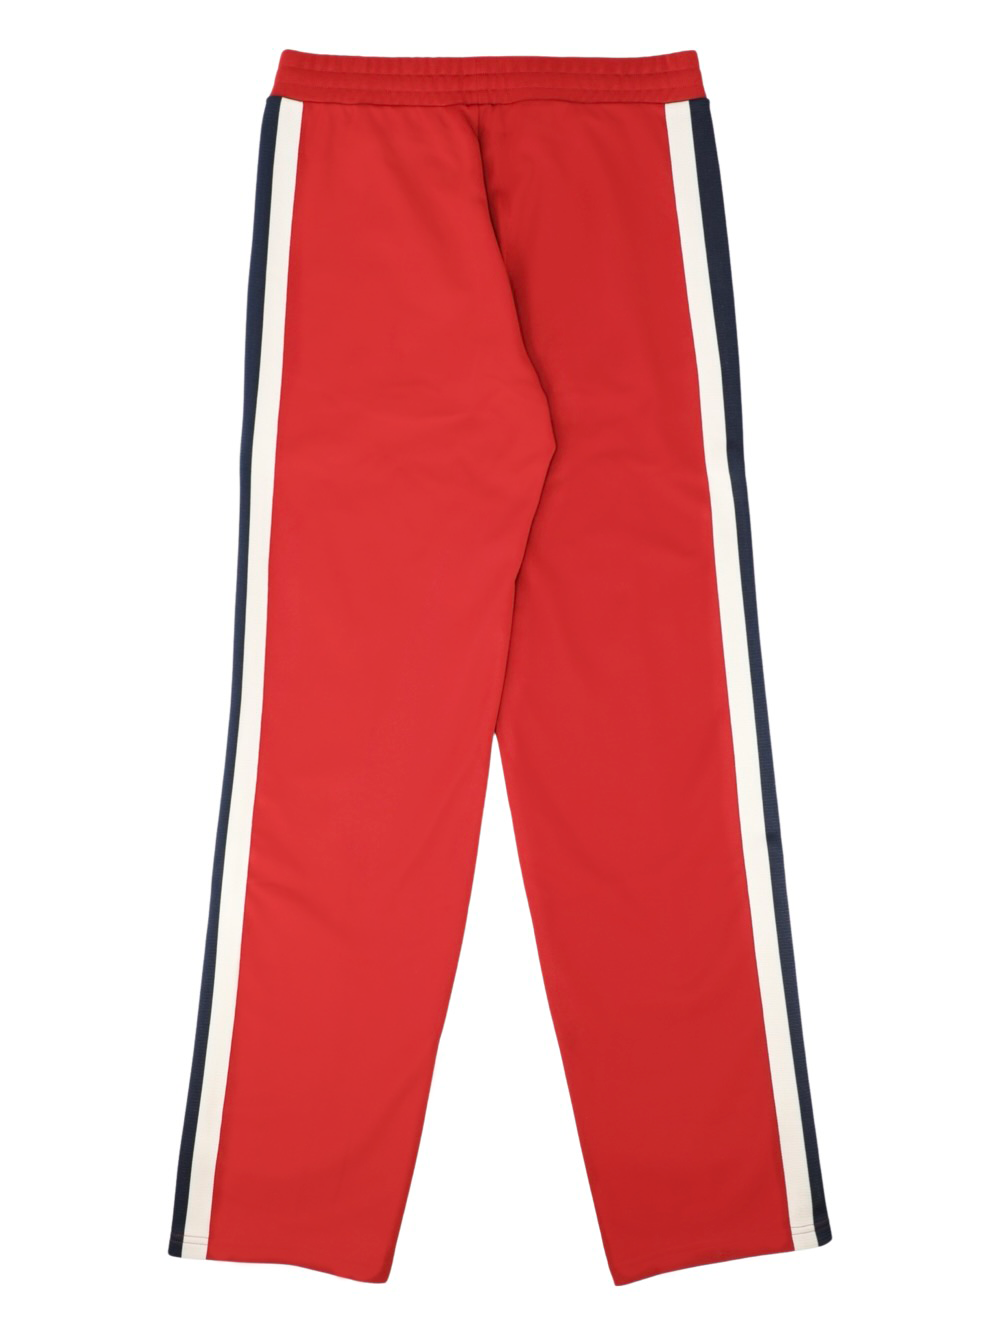 Sporty & Rich SR Sport Track Pants in Red/White